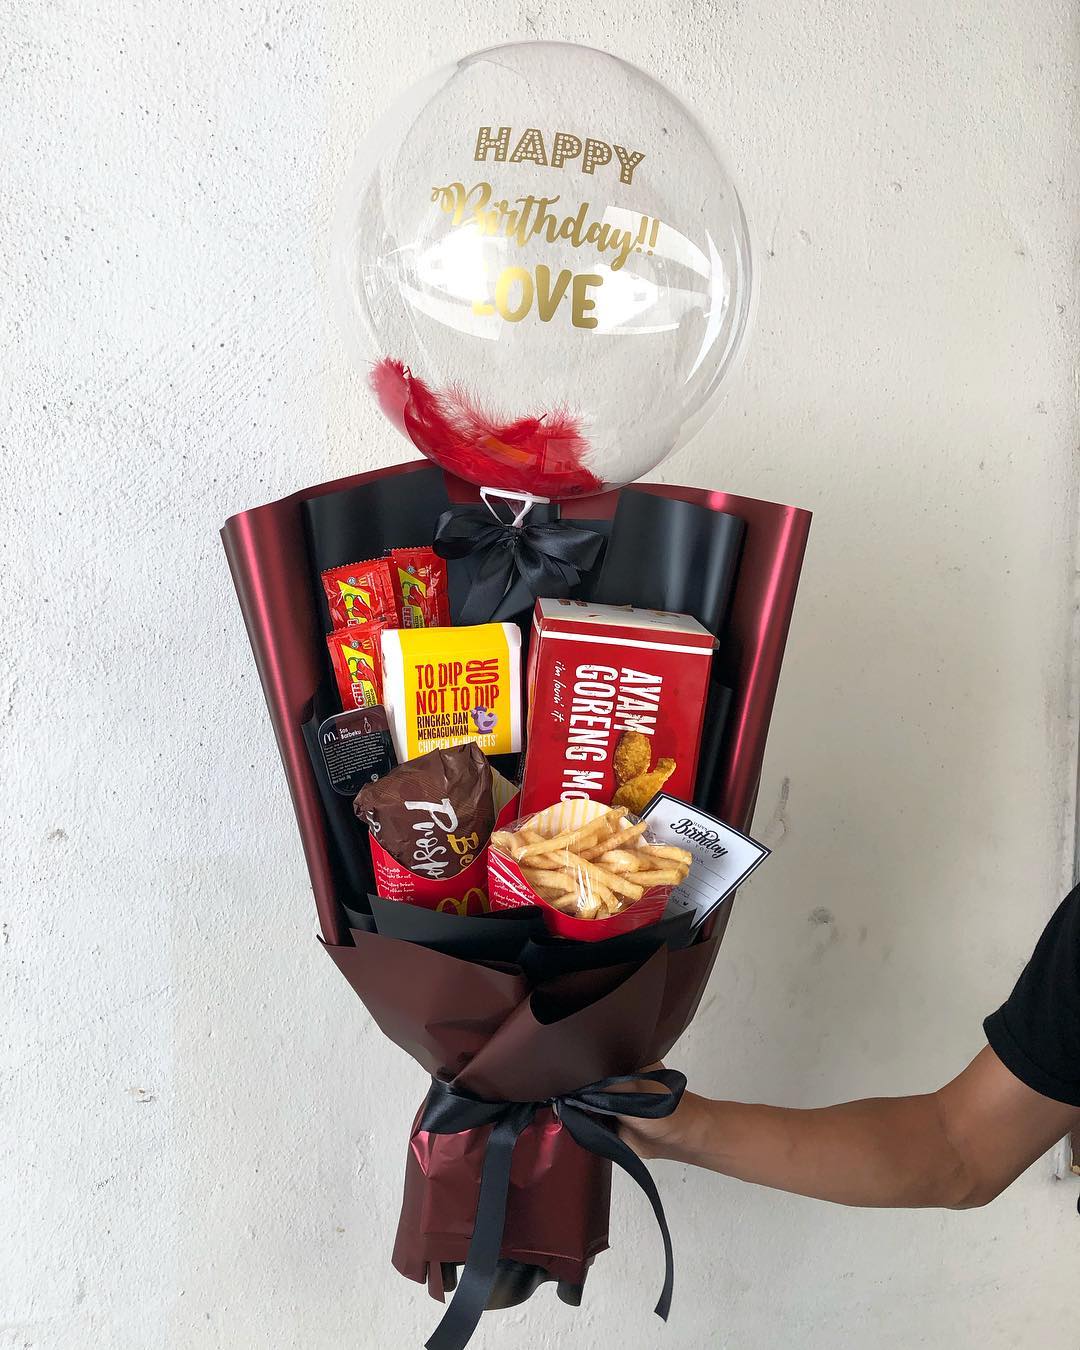 X Unique Bouquets You Can Get In KL This Valentines Day - WORLD OF BUZZ 4